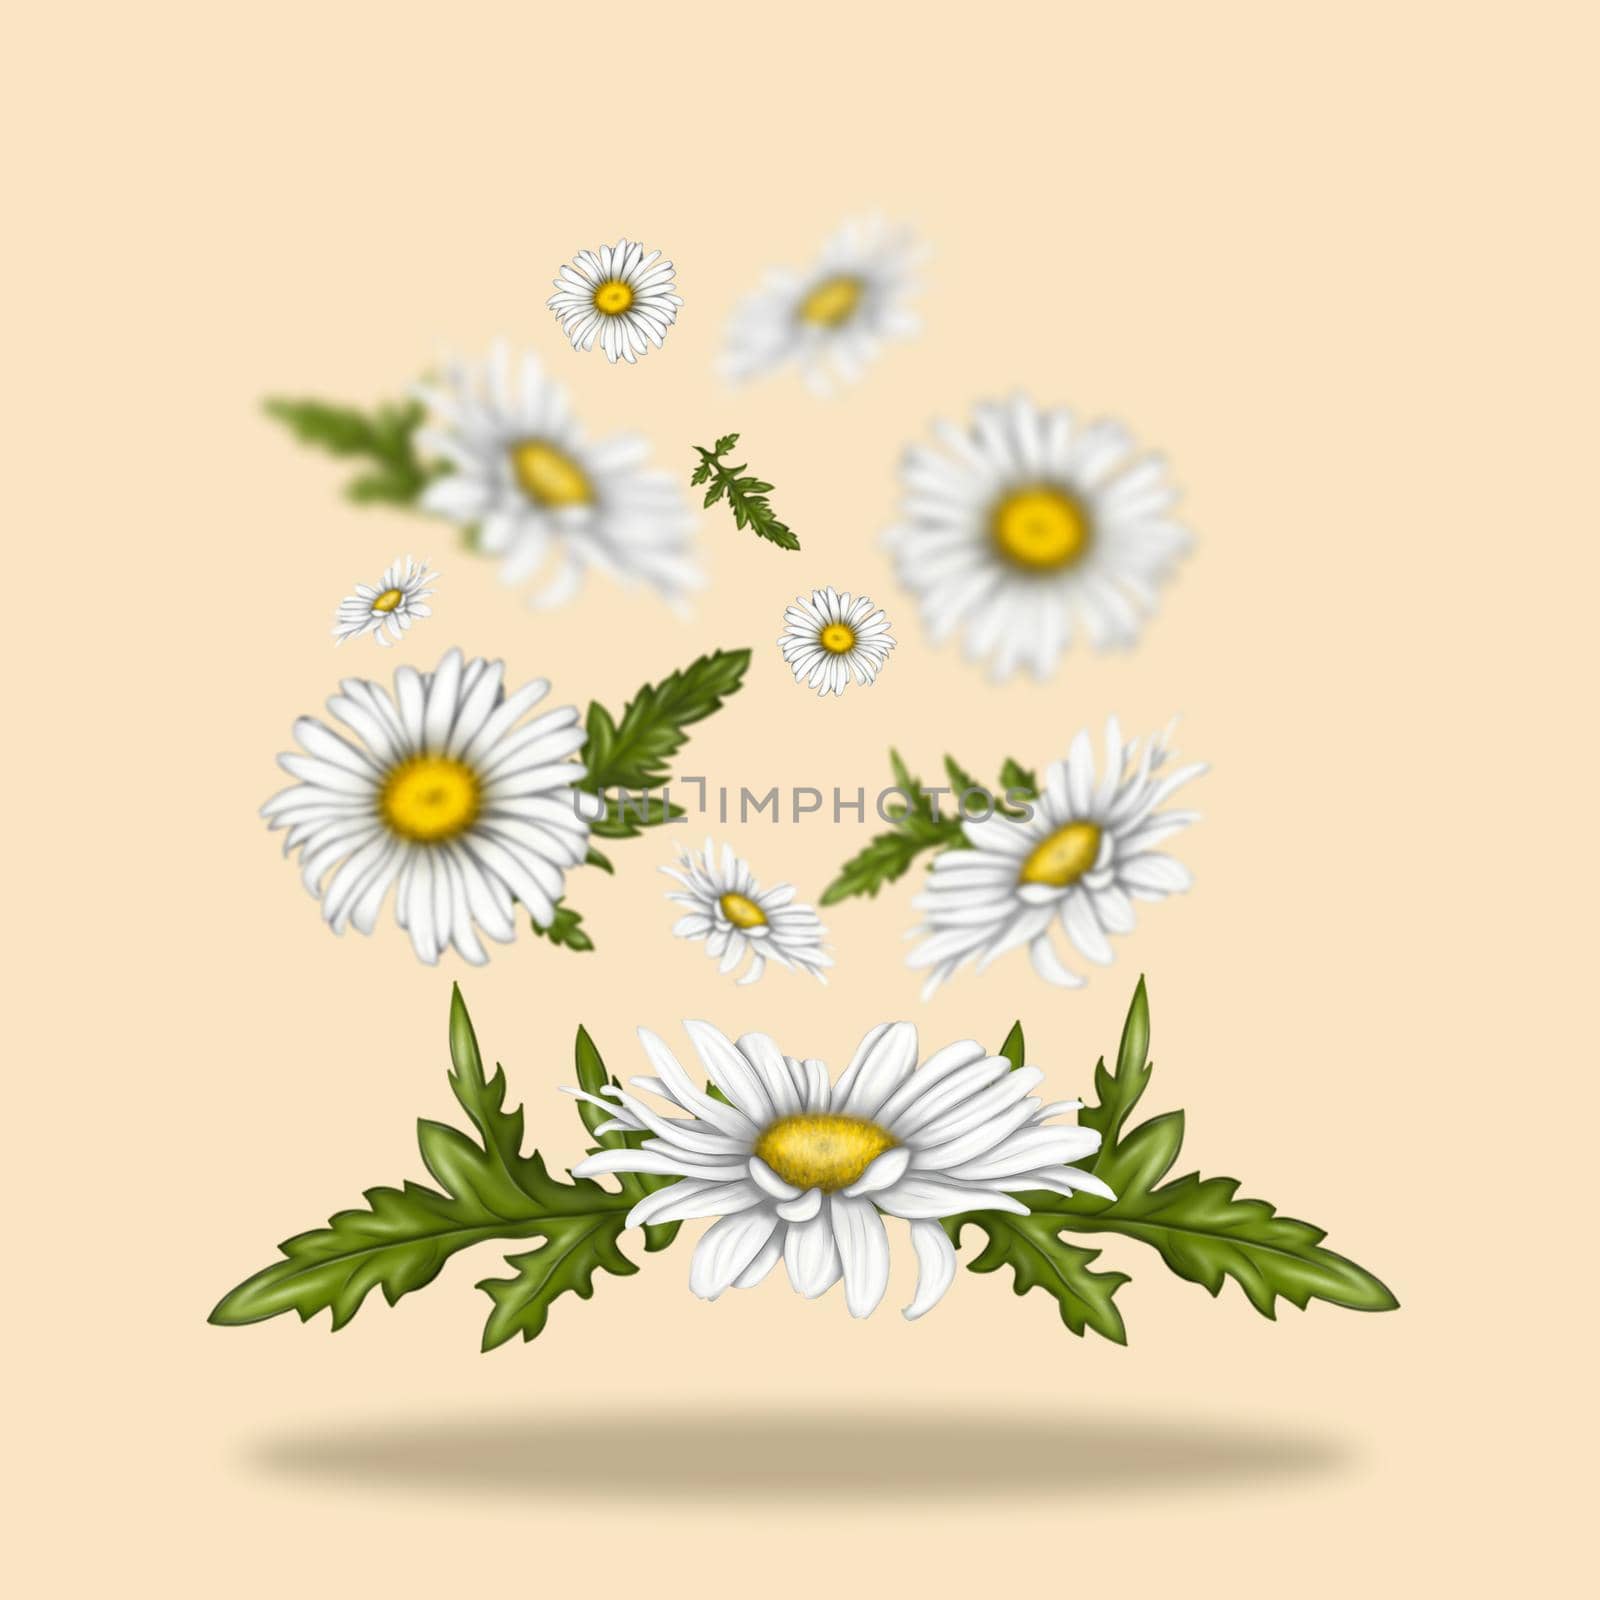 Illustration of chamomile flowers. Flowers float freely in space. White flowers on a light background. Summer